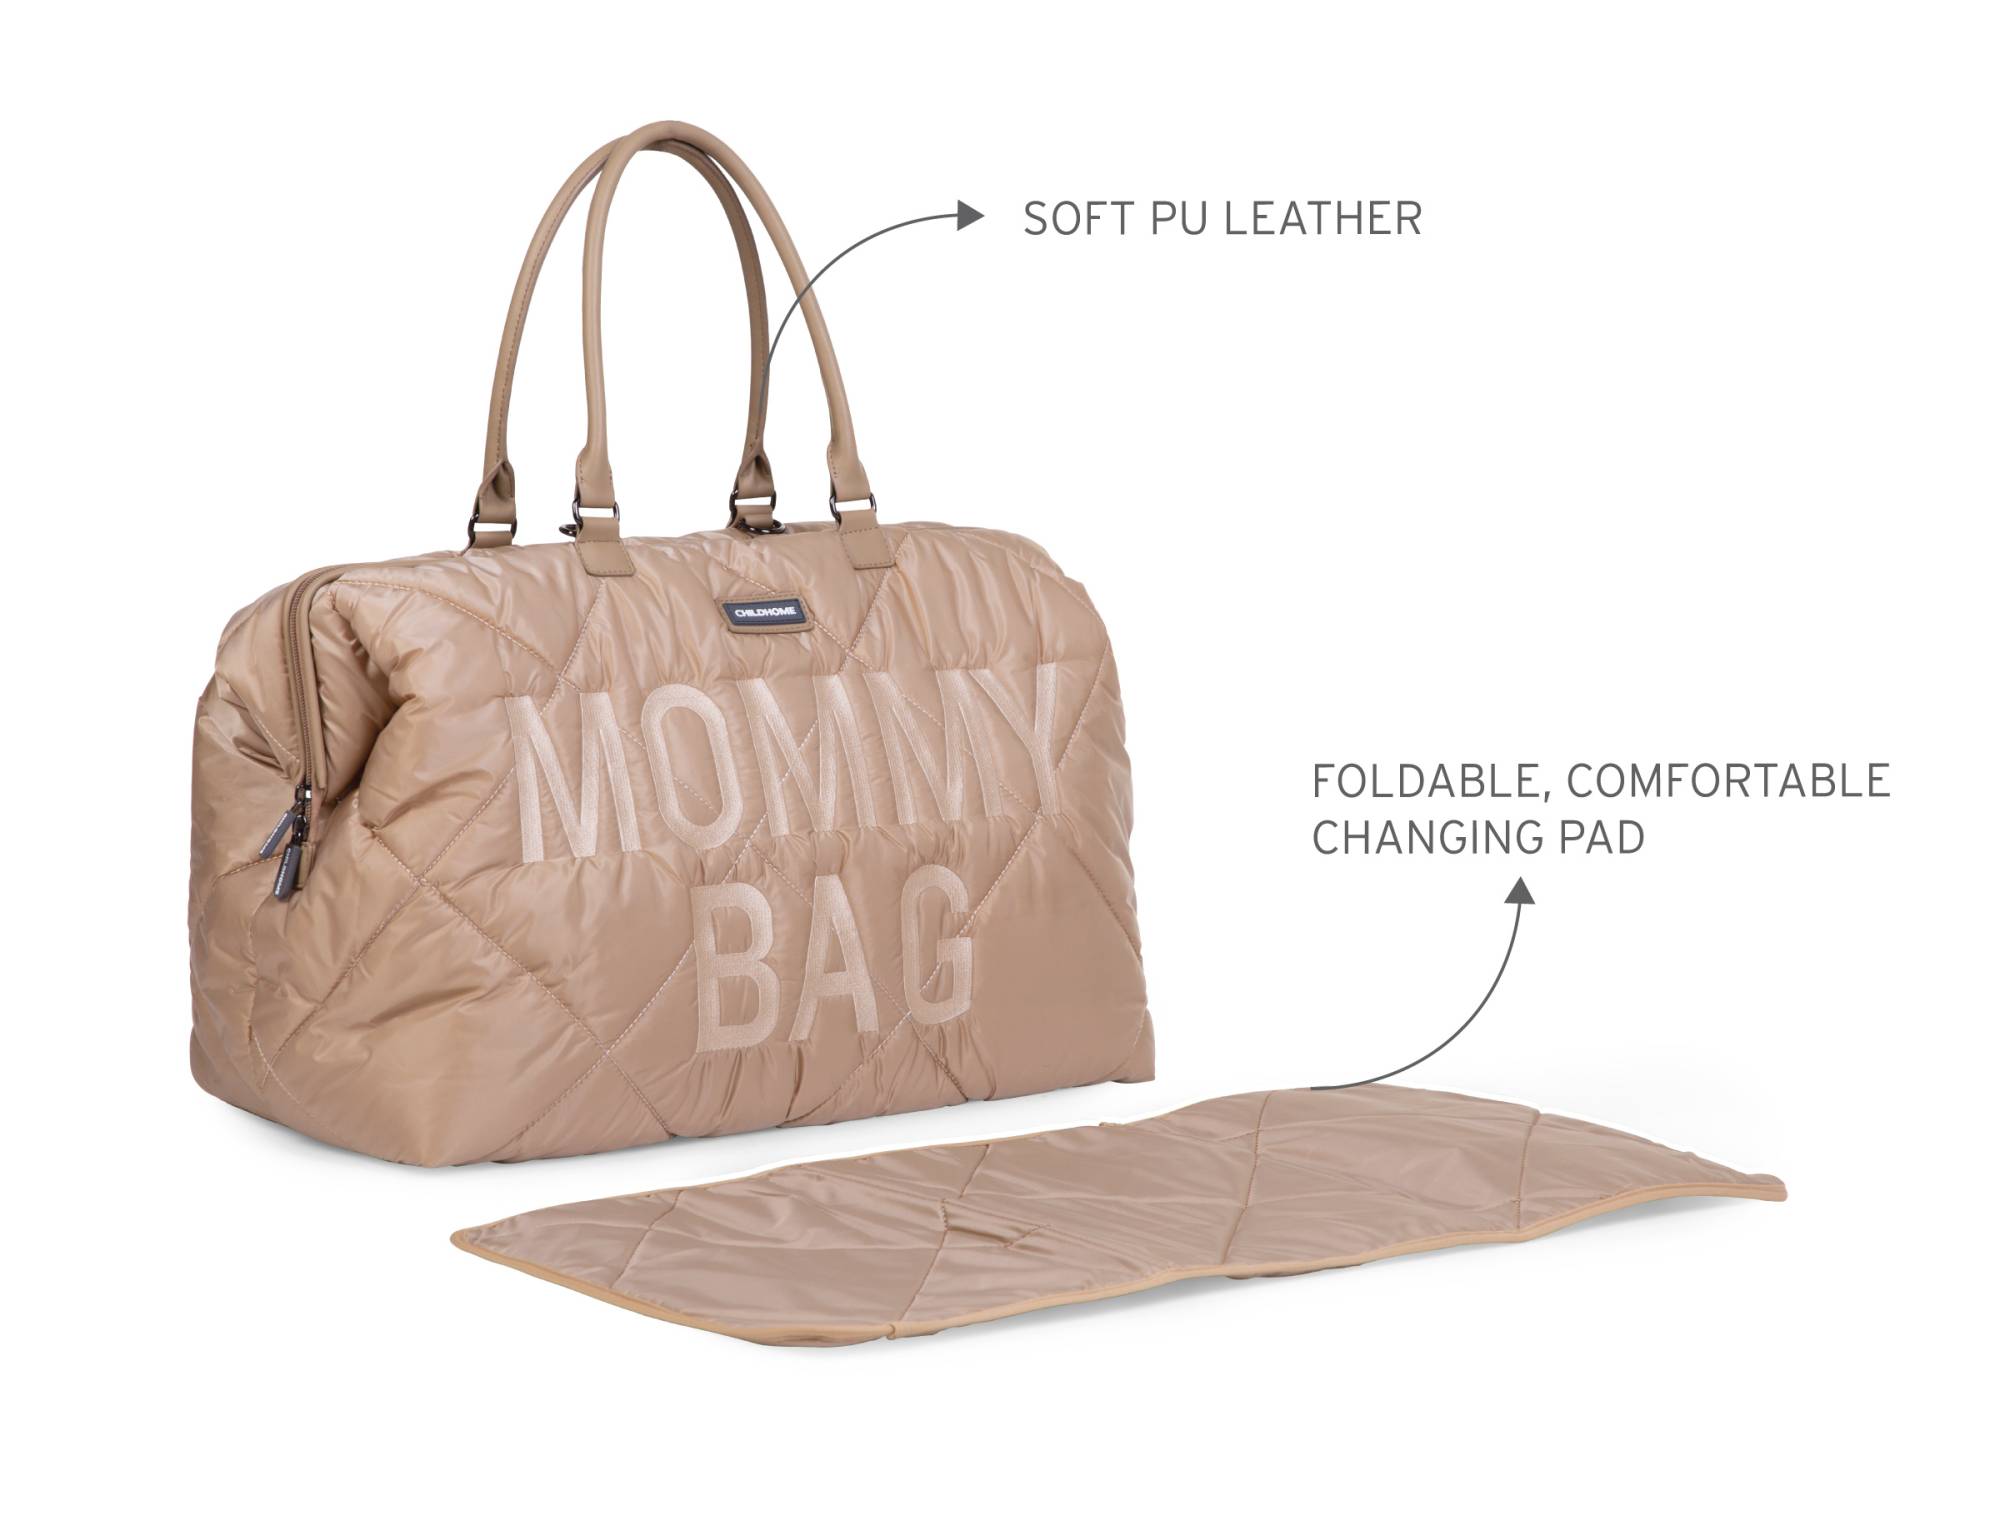 CHILDHOME Mommy Bag - Puffered Beige  Mamatoto - Mother & Child Lifestyle  Shop